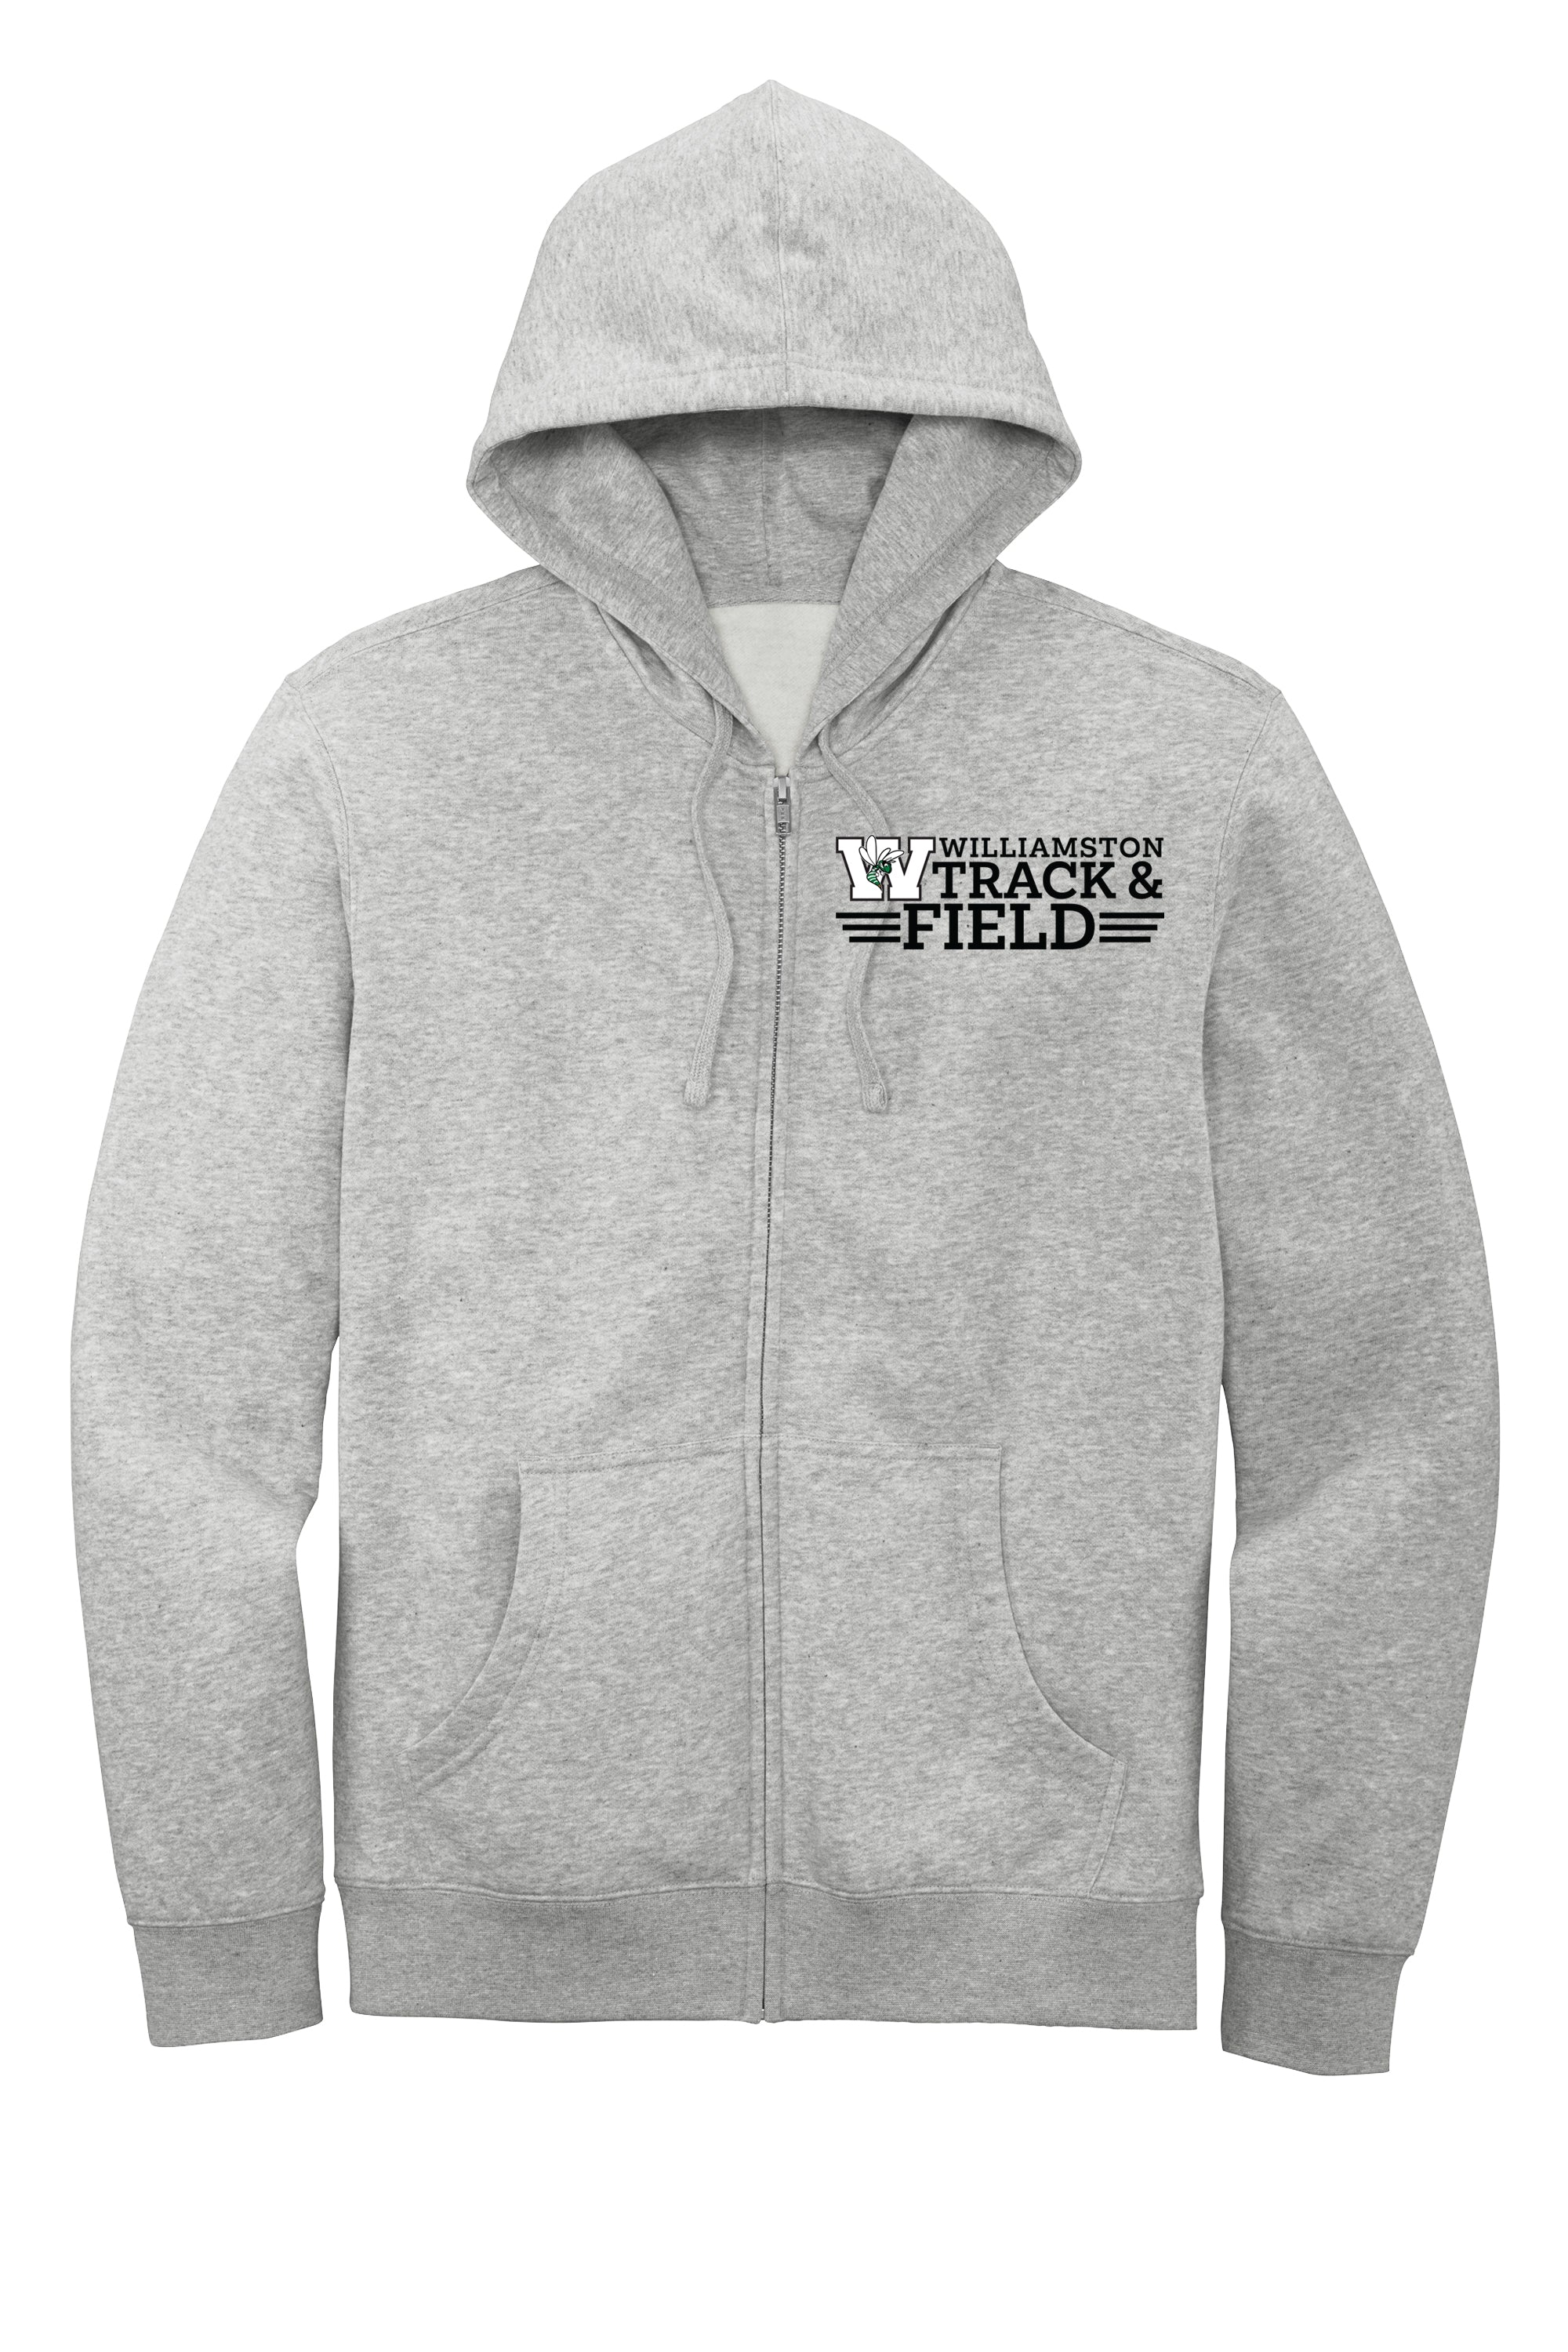 Williamston Track and Field - Zip Up Hoodie